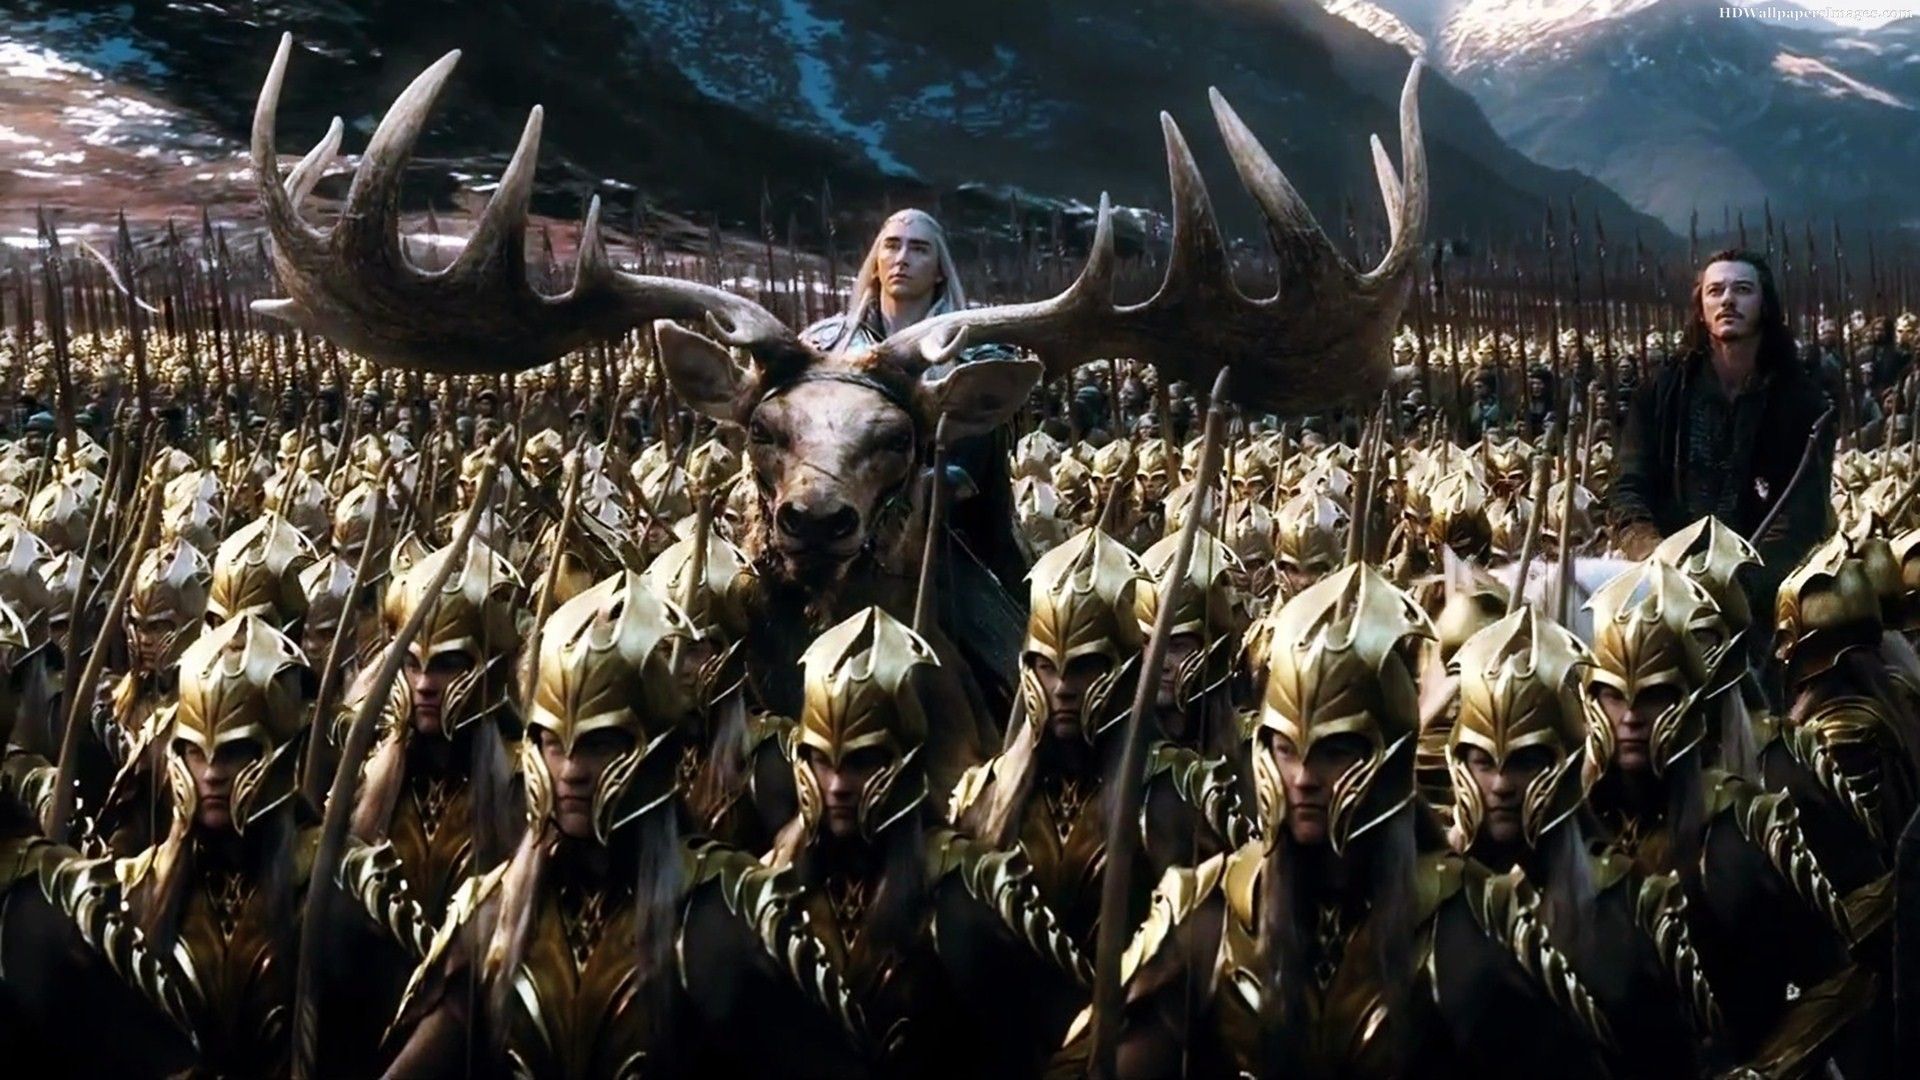 Lee Pace and Luke Evans in The Hobbit Battle of the Five Armies